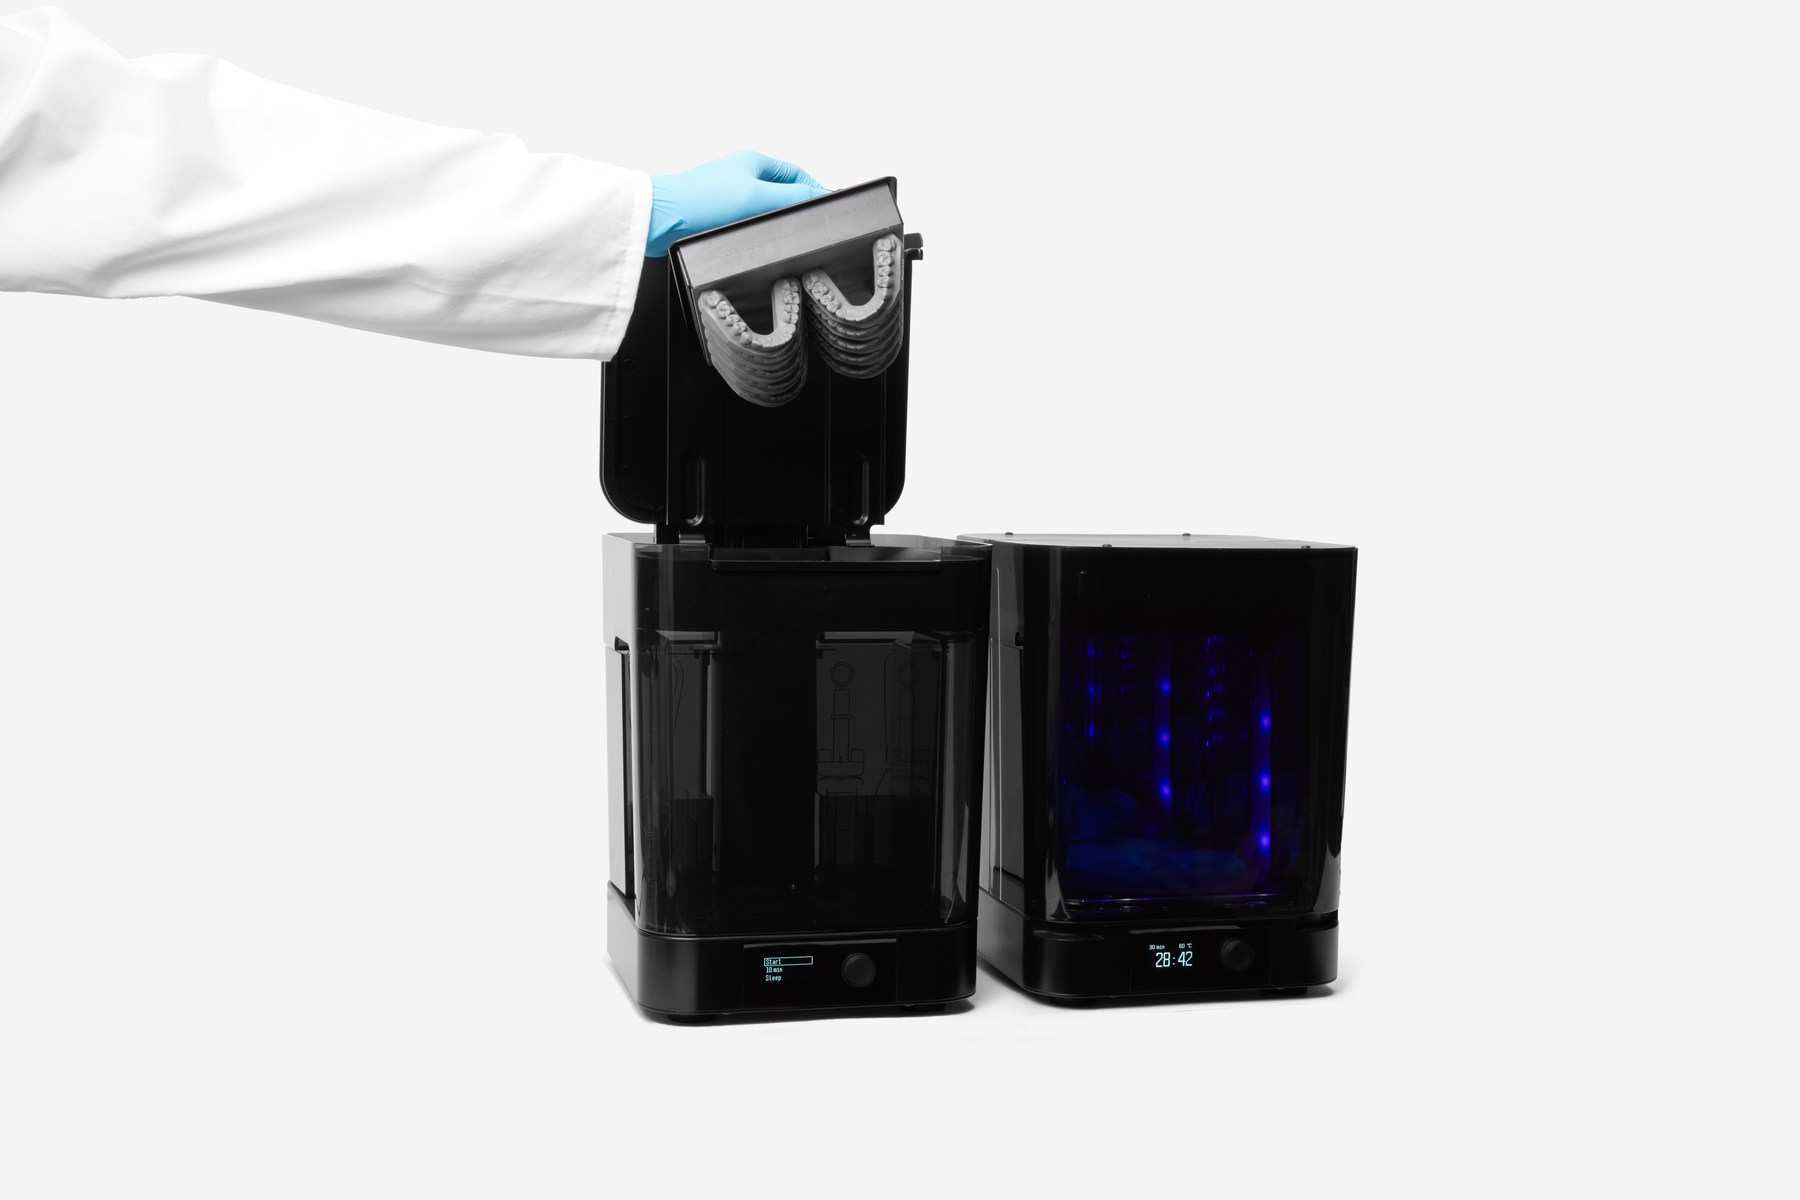 Image shows dental technician removing digital dentures from Form Wash, a post-processing station from Formlabs